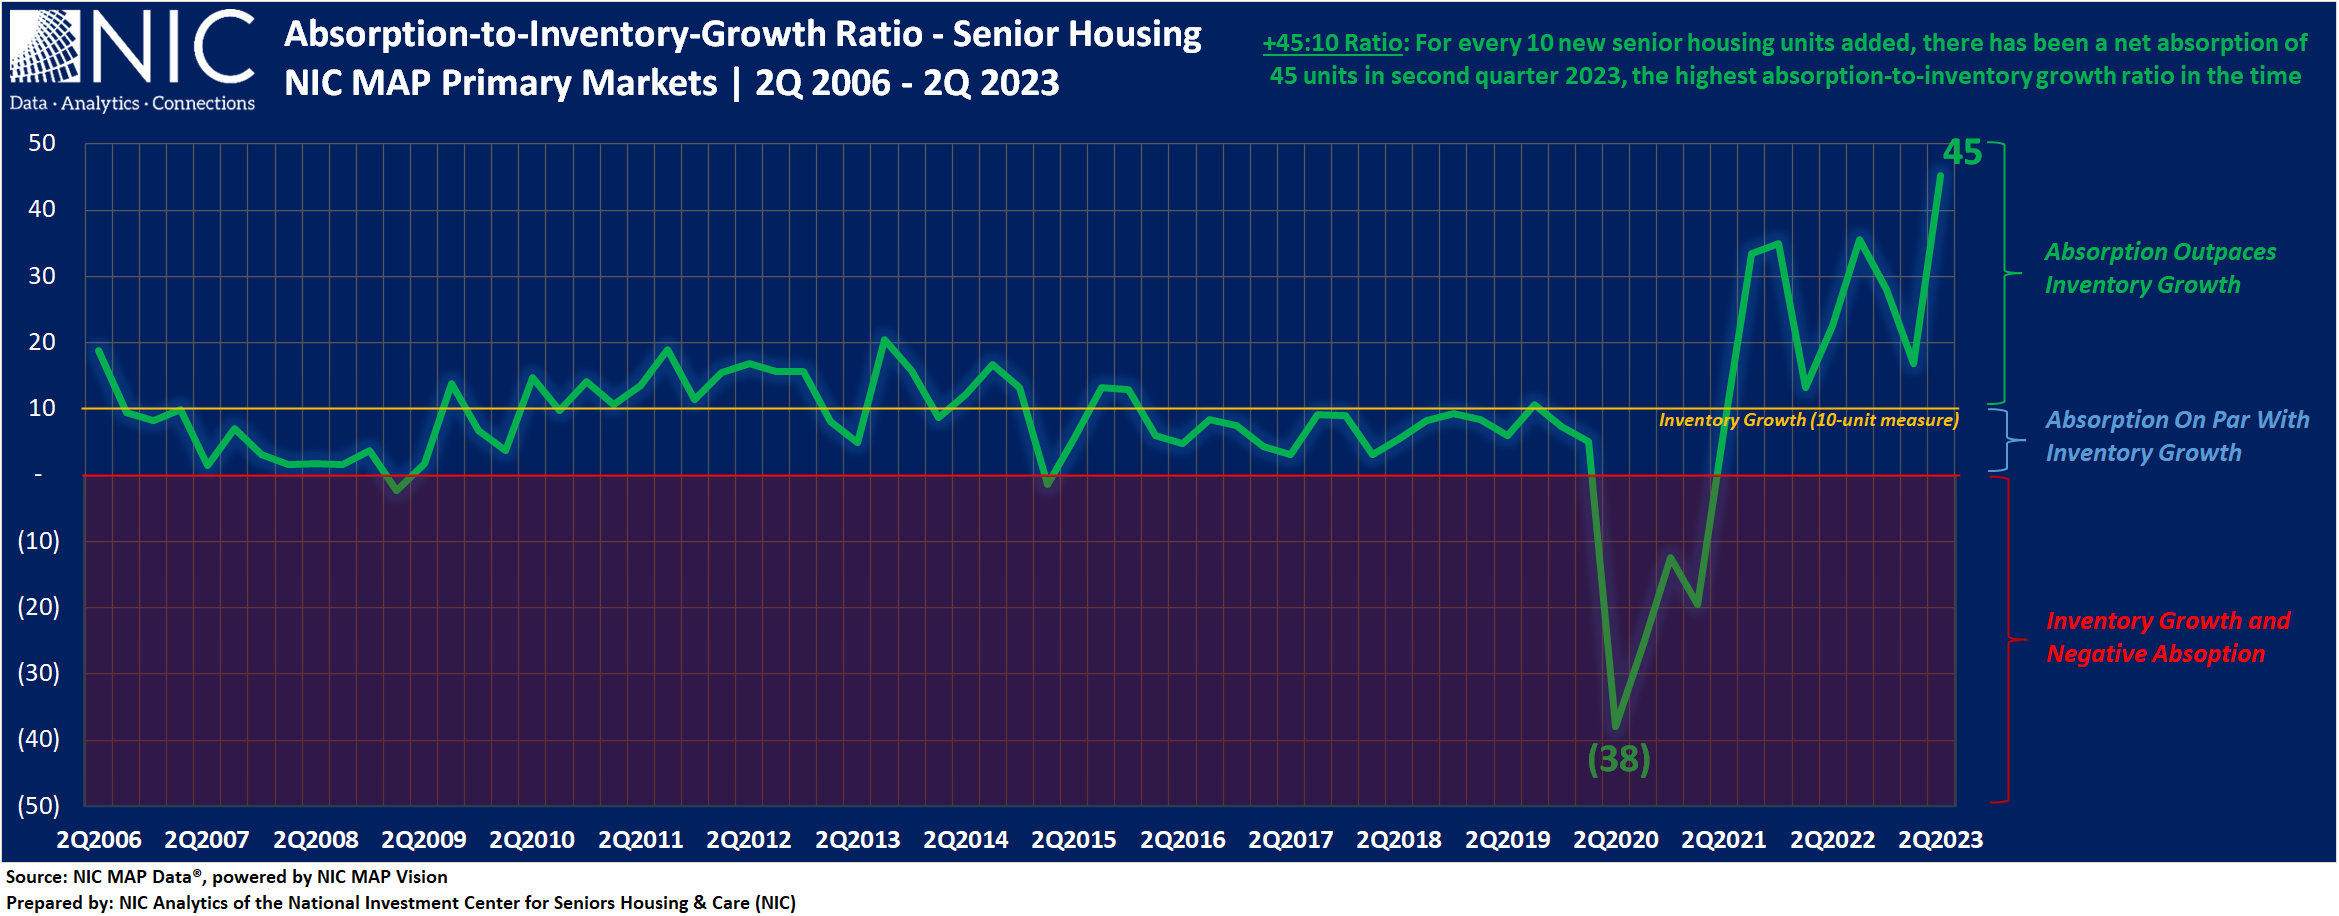 The exhibit depicts the senior housing absorption-to-inventory growth ratio for the NIC MAP Primary Markets since 2006. In the second quarter of 2023, for every 10 new senior housing units added, there has been a net absorption of 45 units, the highest absorption-to-inventory-growth ratio since NIC MAP Vision began reporting.  Chart also depicts  2Q of 2020, having ratio of -38:10.